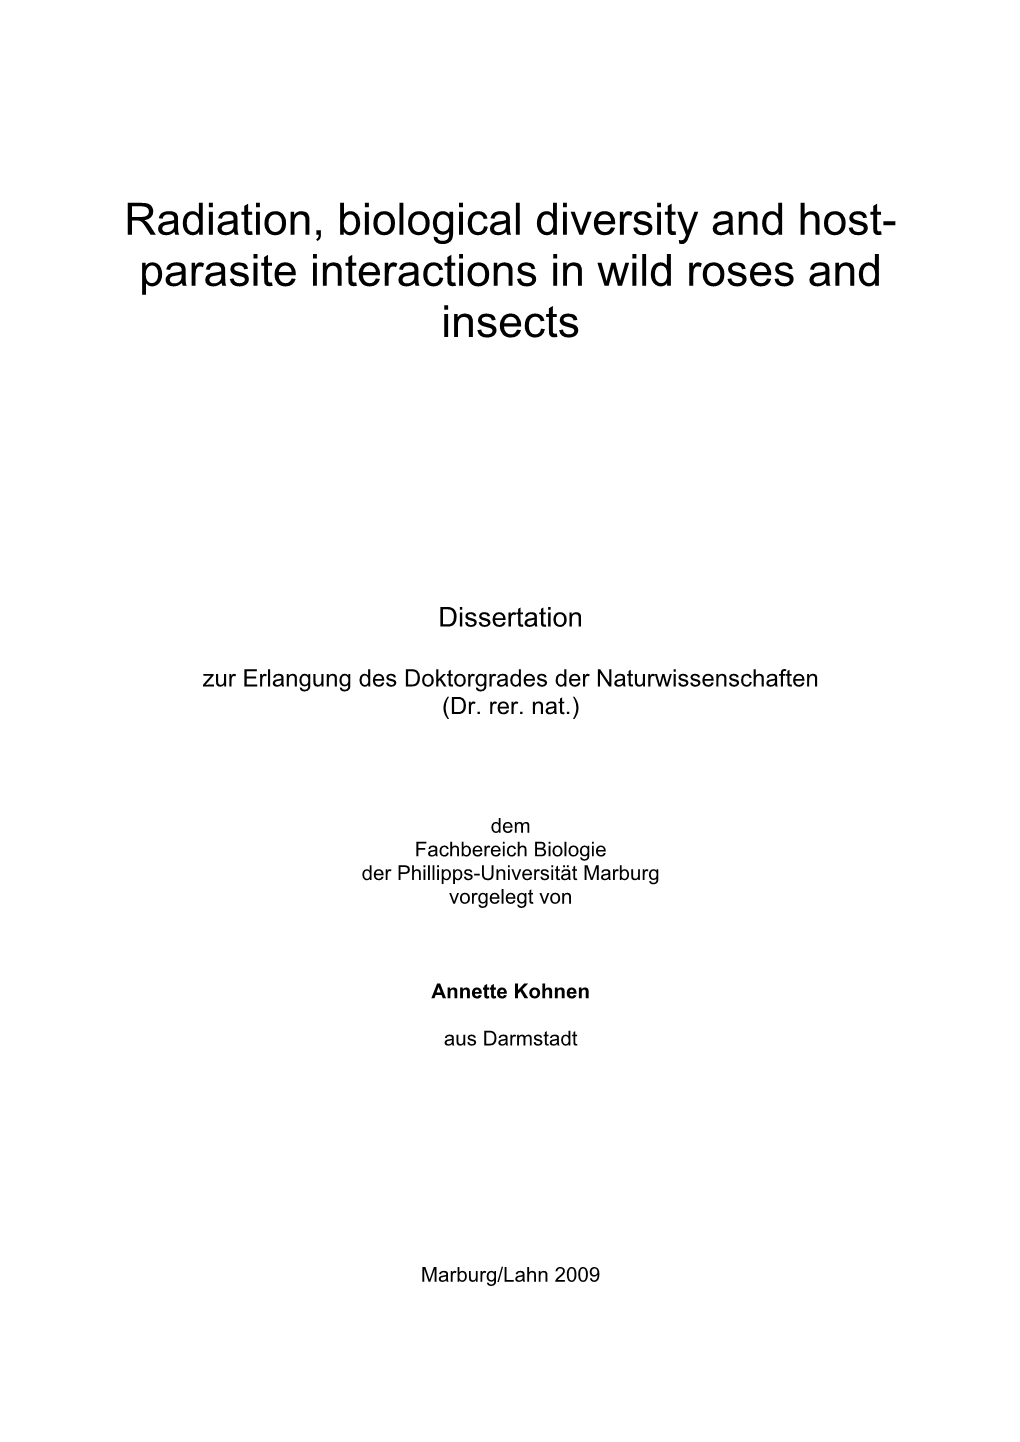 Radiation, Biological Diversity and Host- Parasite Interactions in Wild Roses and Insects